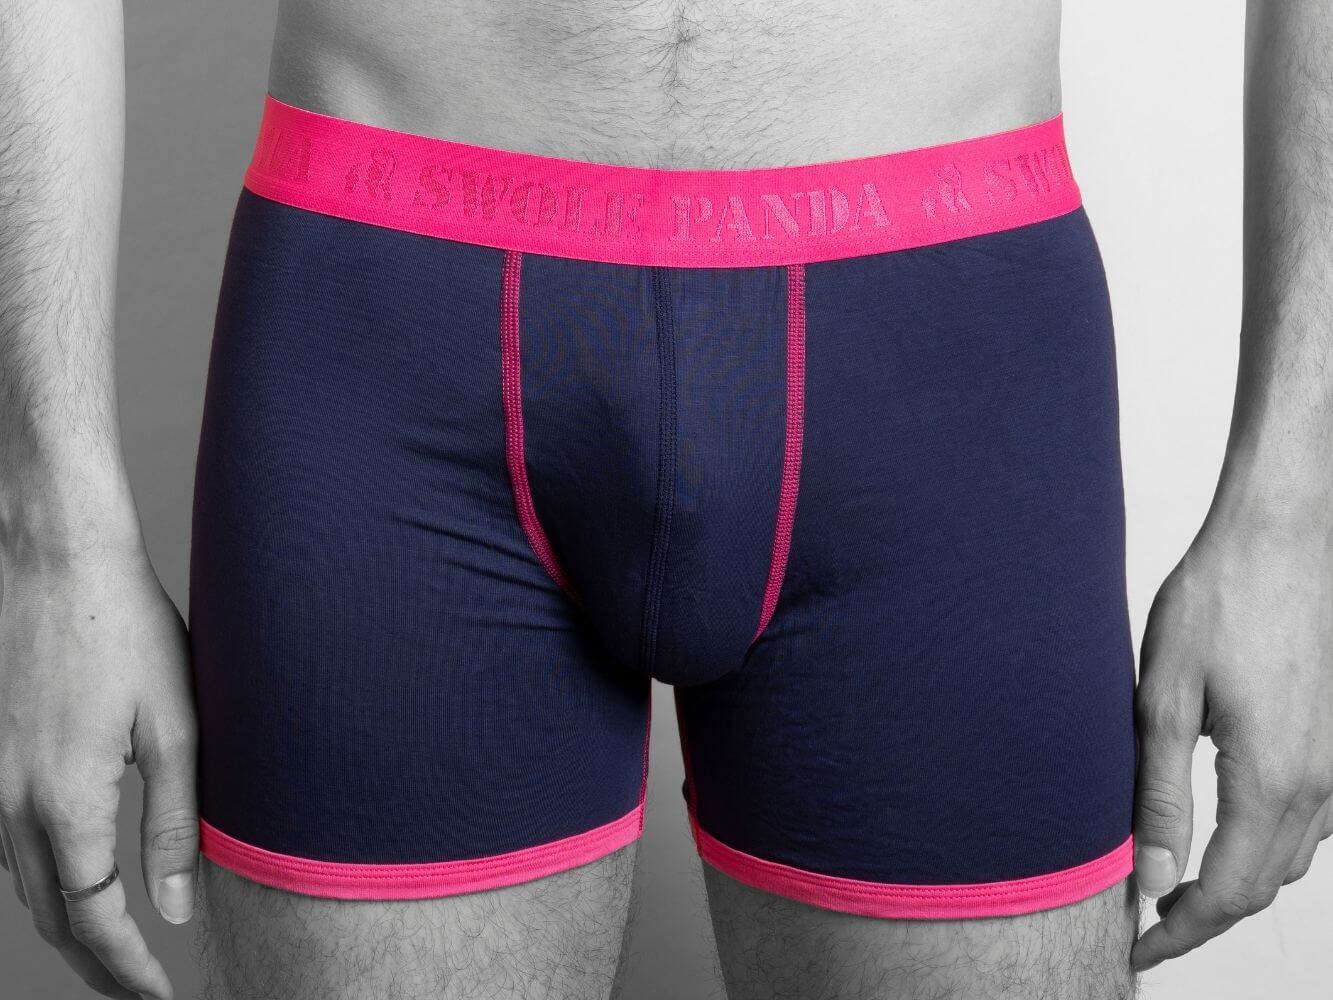 Underwear - Bamboo Boxers - Navy / Pink Band